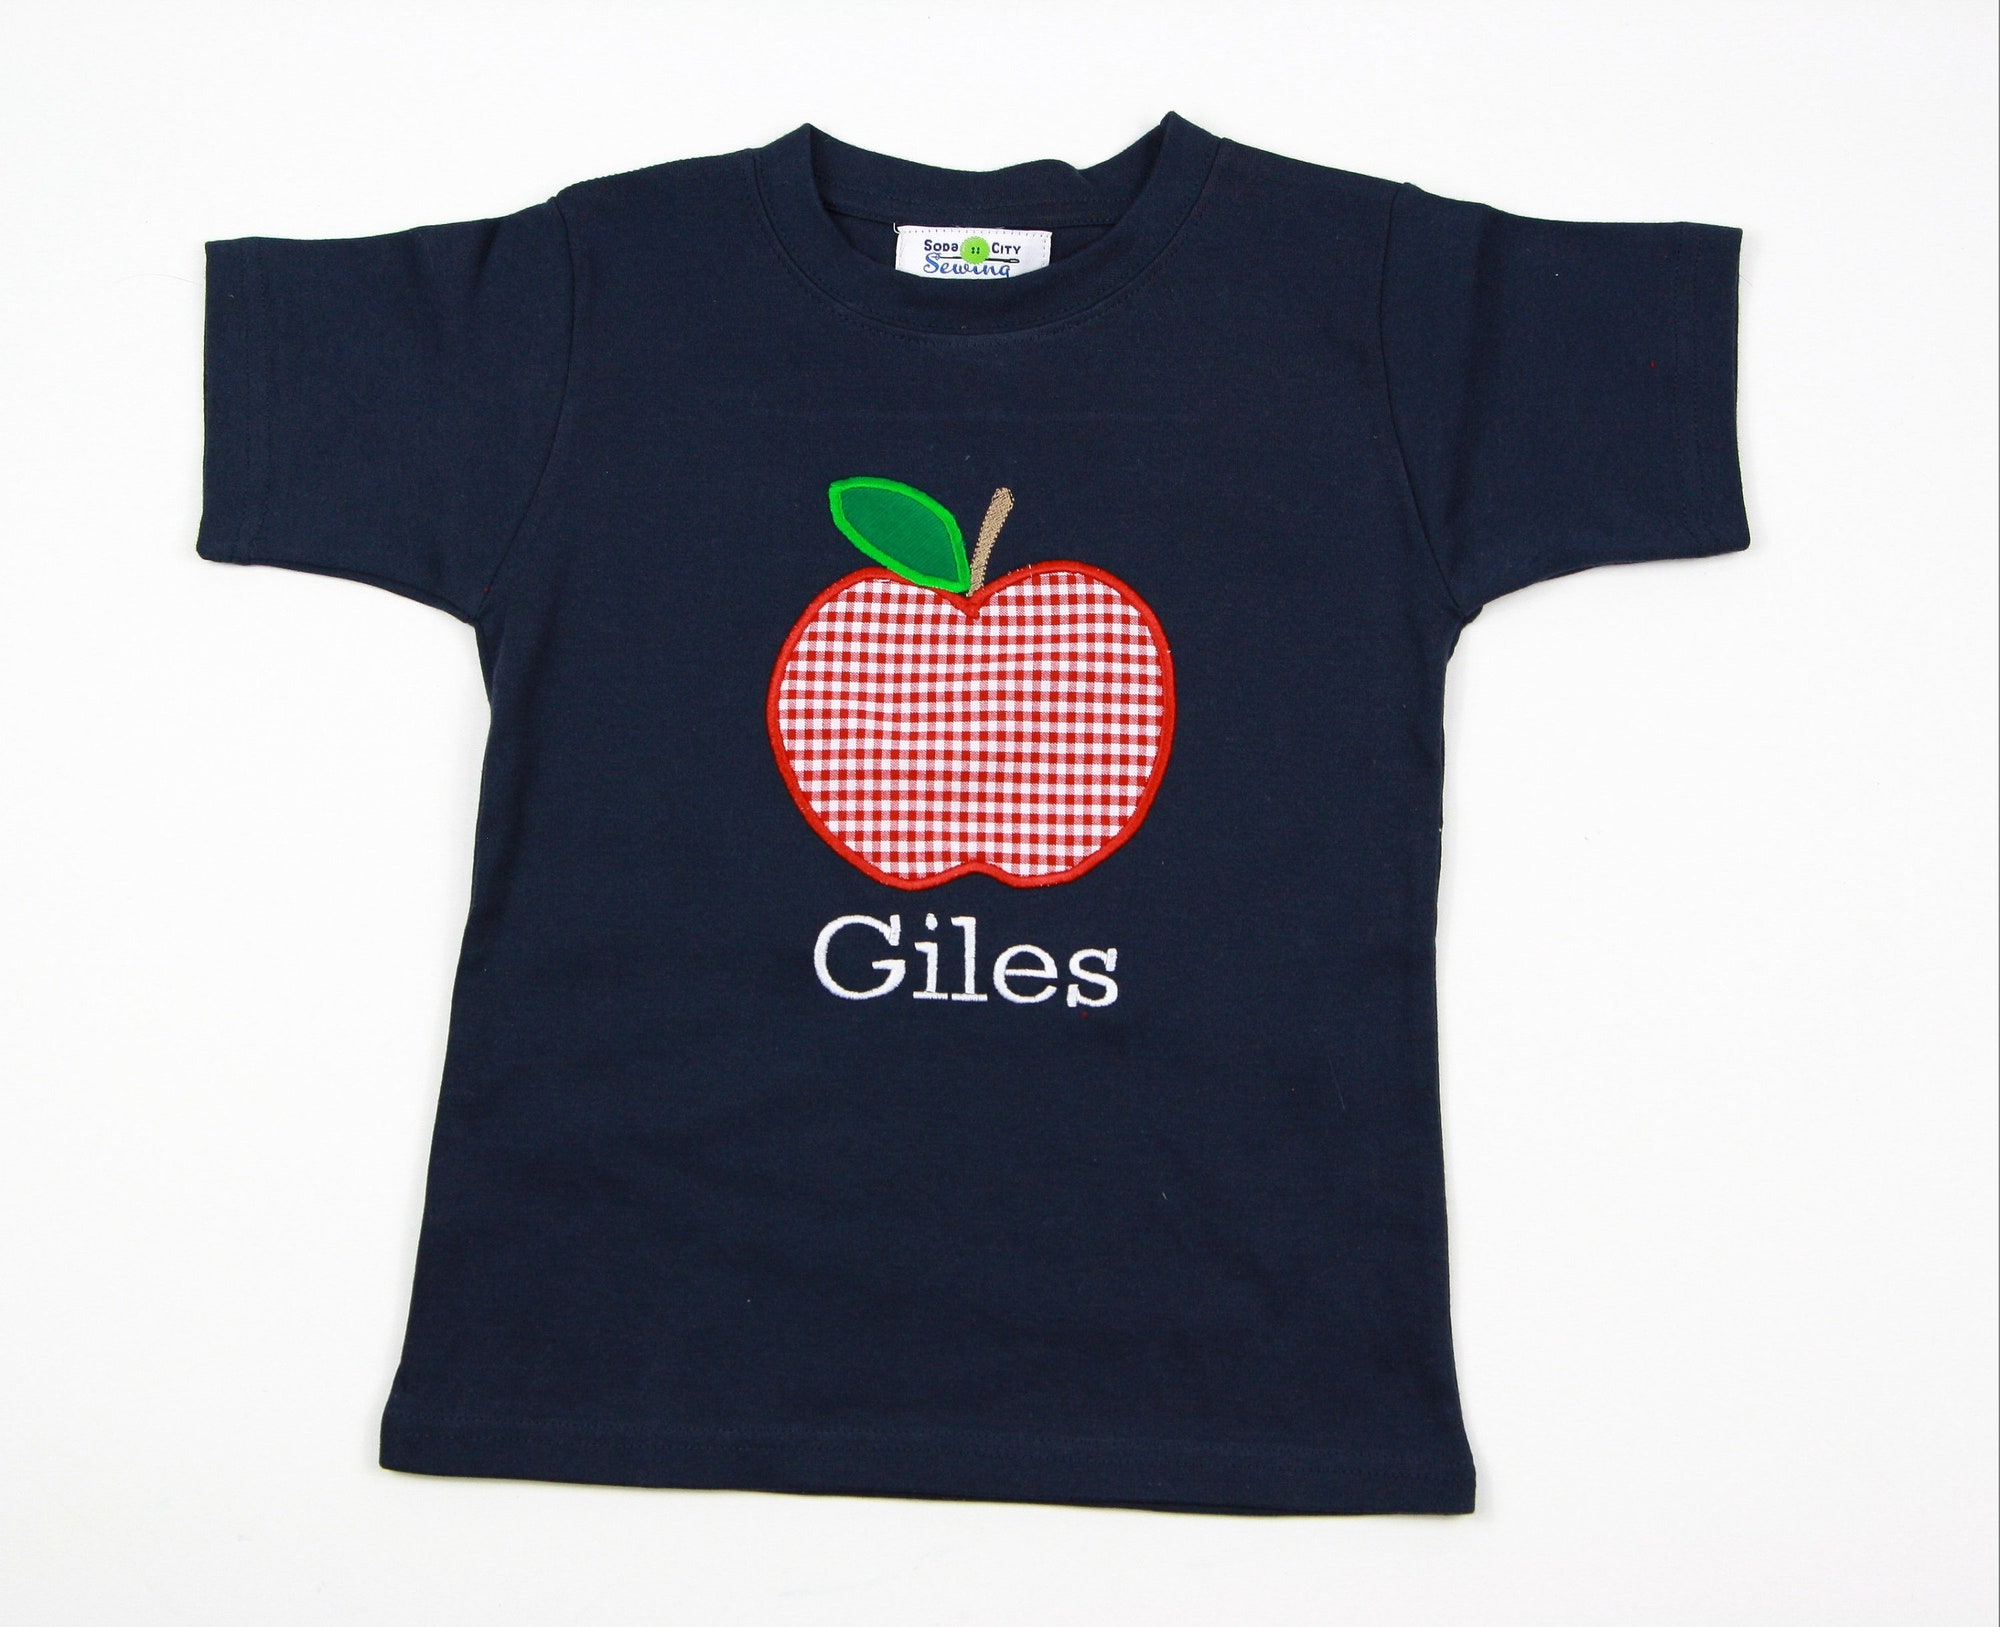 Boys Back to School Outfit - Apple Applique Shirt - First Day of Preschool T-shirt